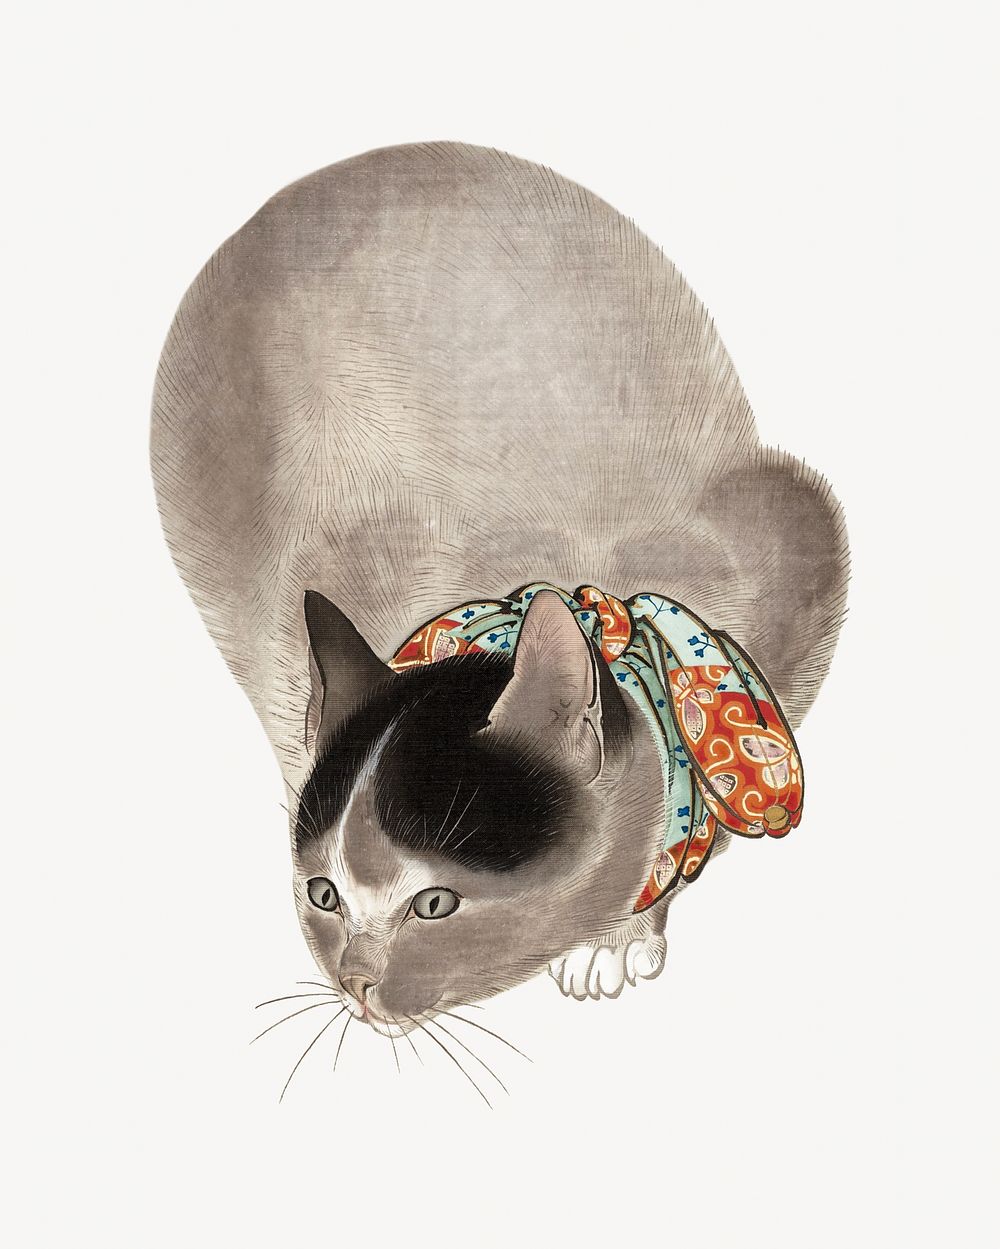 Cat, vintage animal illustration by Oide Tōkō.  Remixed by rawpixel. 